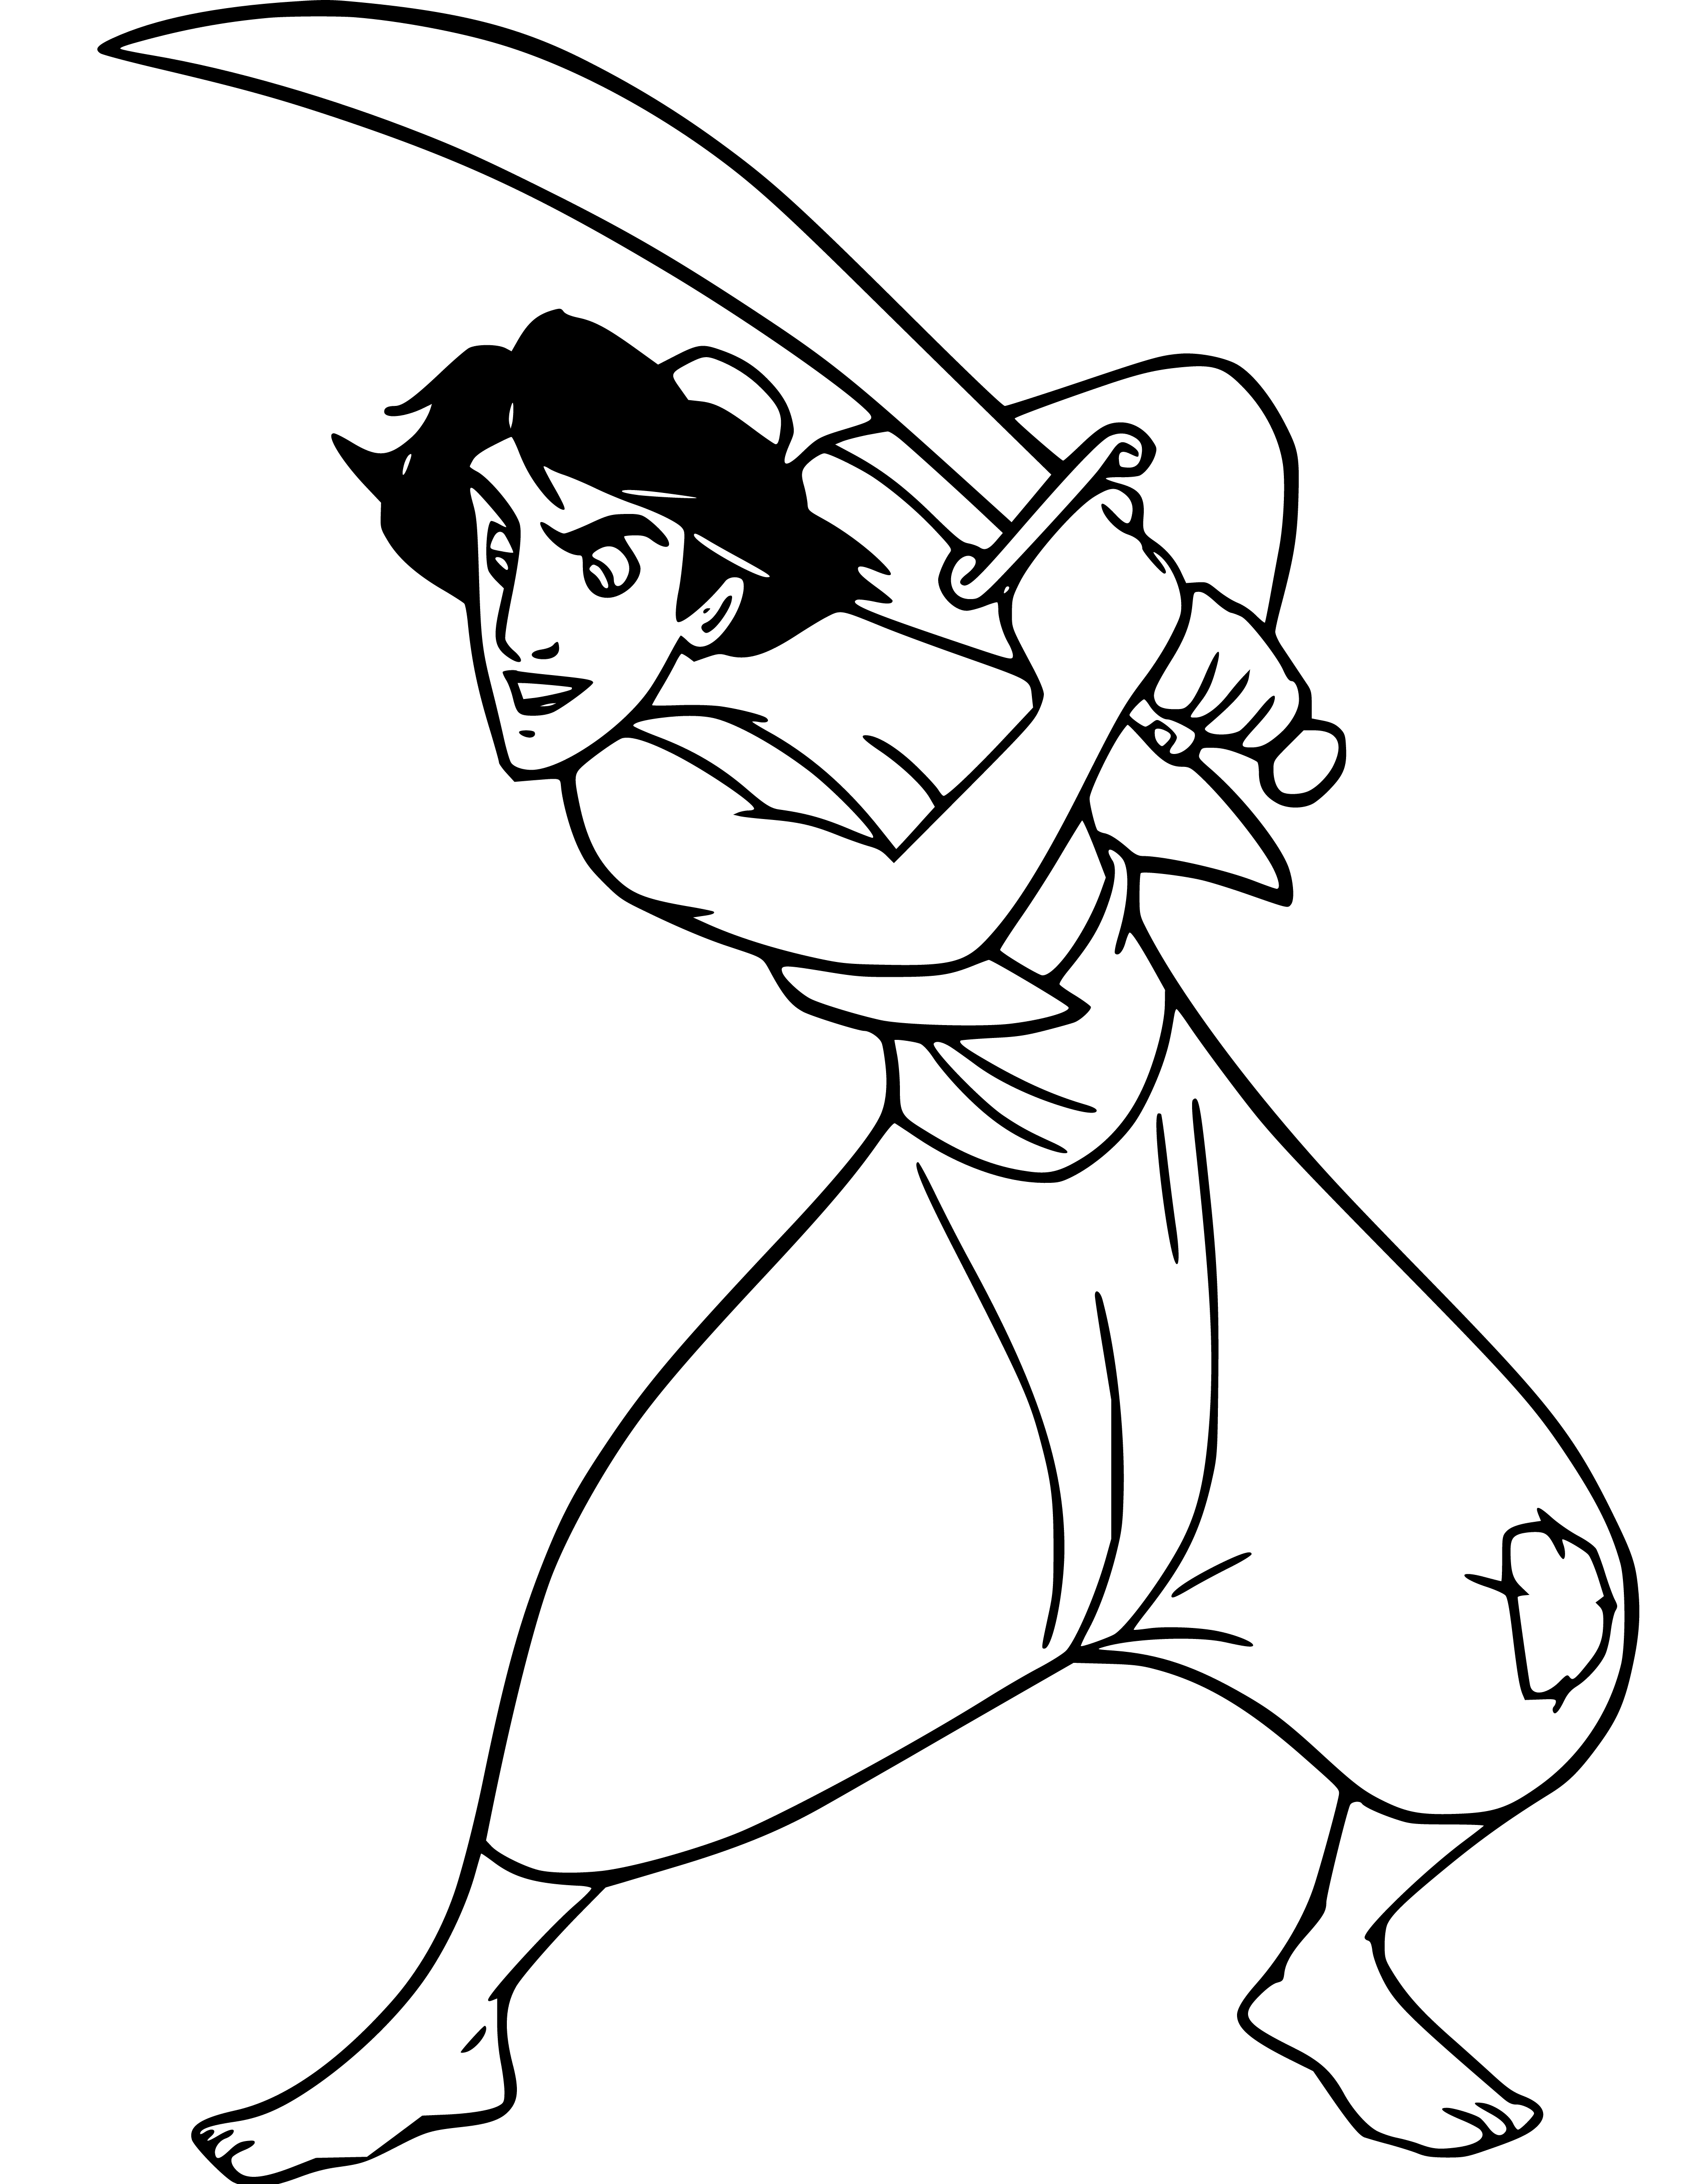 Printable Aladdin holding a sword Coloring Page for kids.